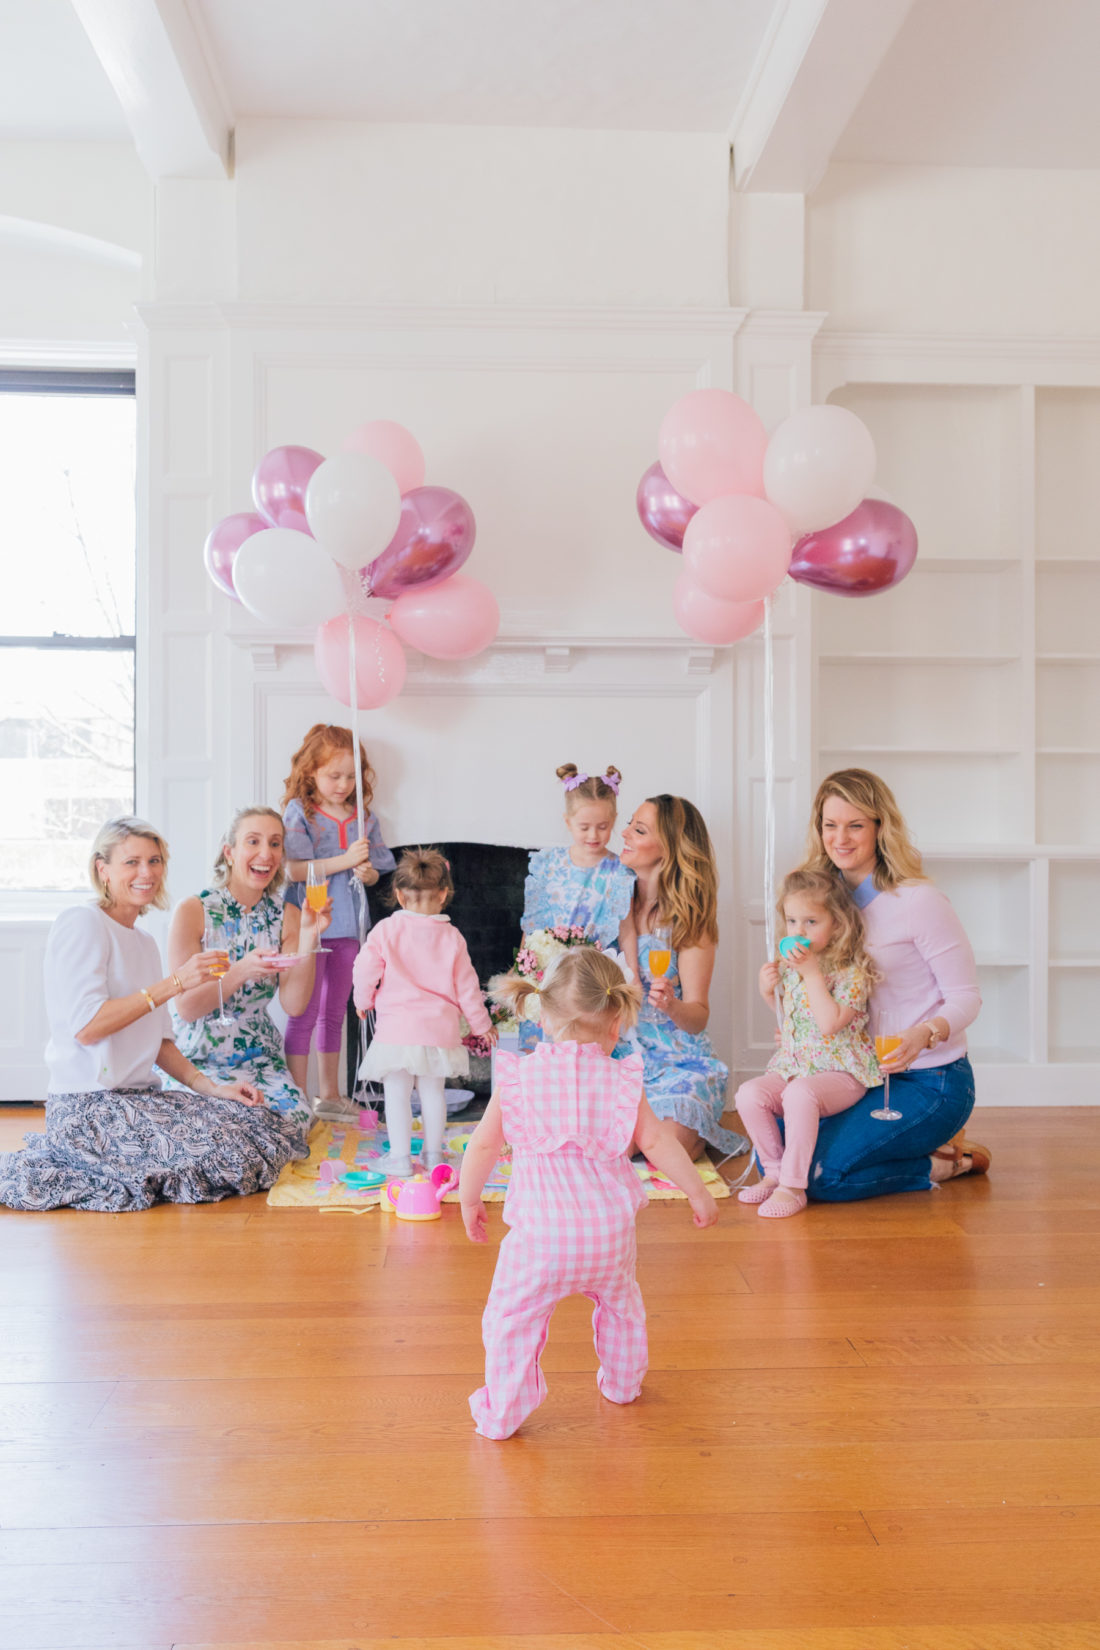 Eva Amurri Martino of Happily Eva After, Sarah, owner of Indigo Acupuncture + Wellness, Lauren, owner Dudley Stephens, and blogger Julia from Lemon Stripes throw a tea party for their daughters